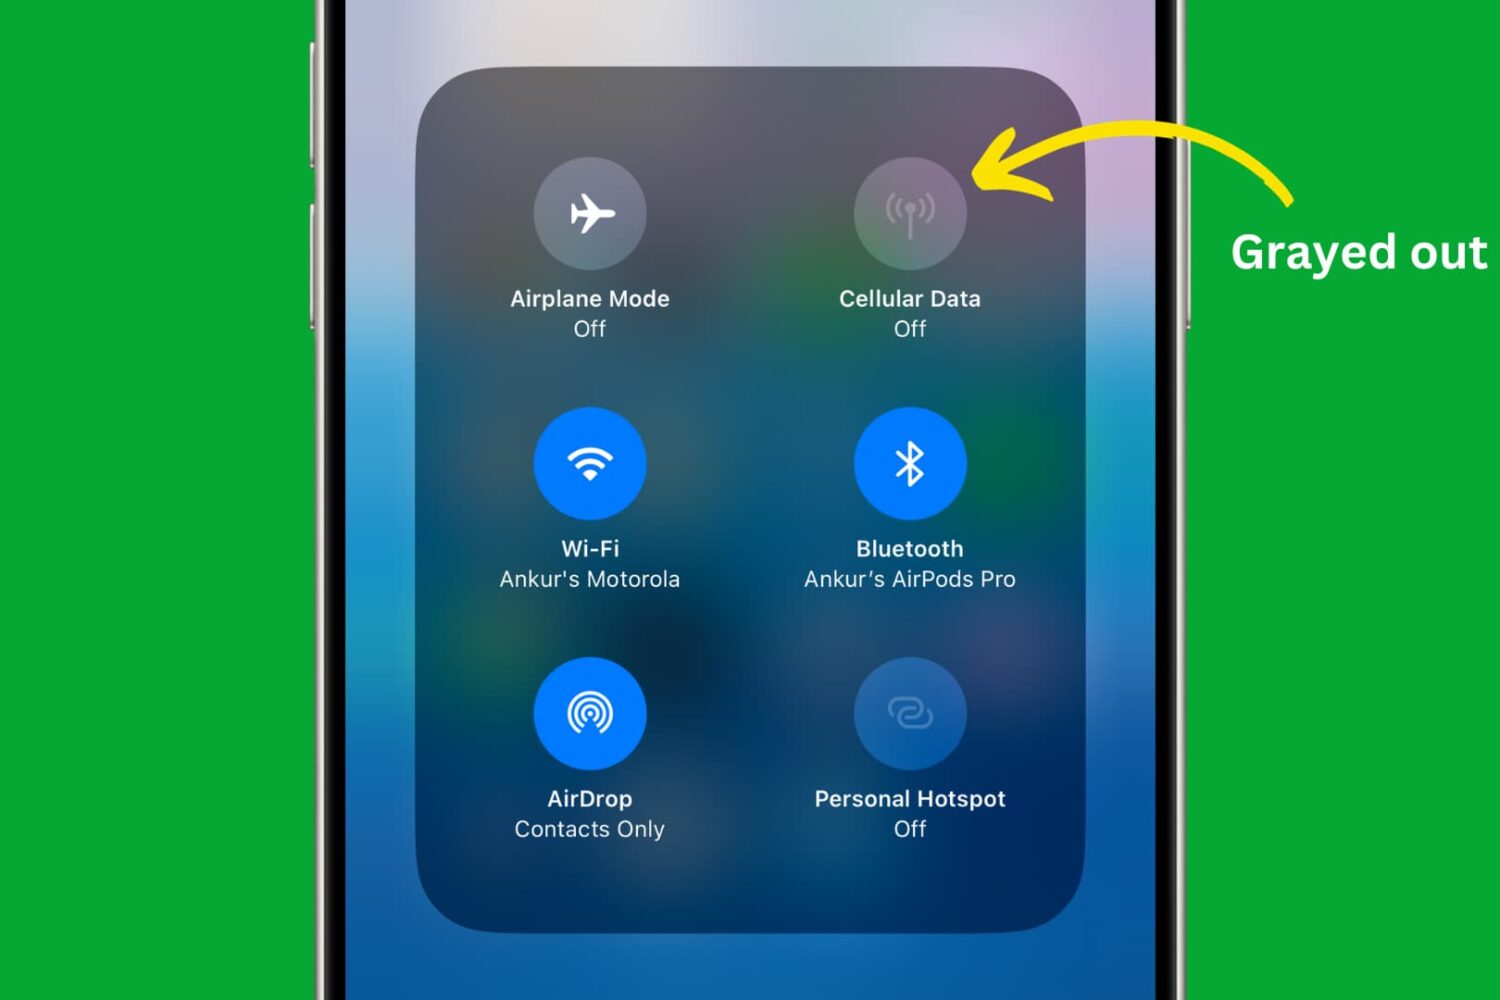 iPhone Cellular data button grayed out in iPhone Control Center